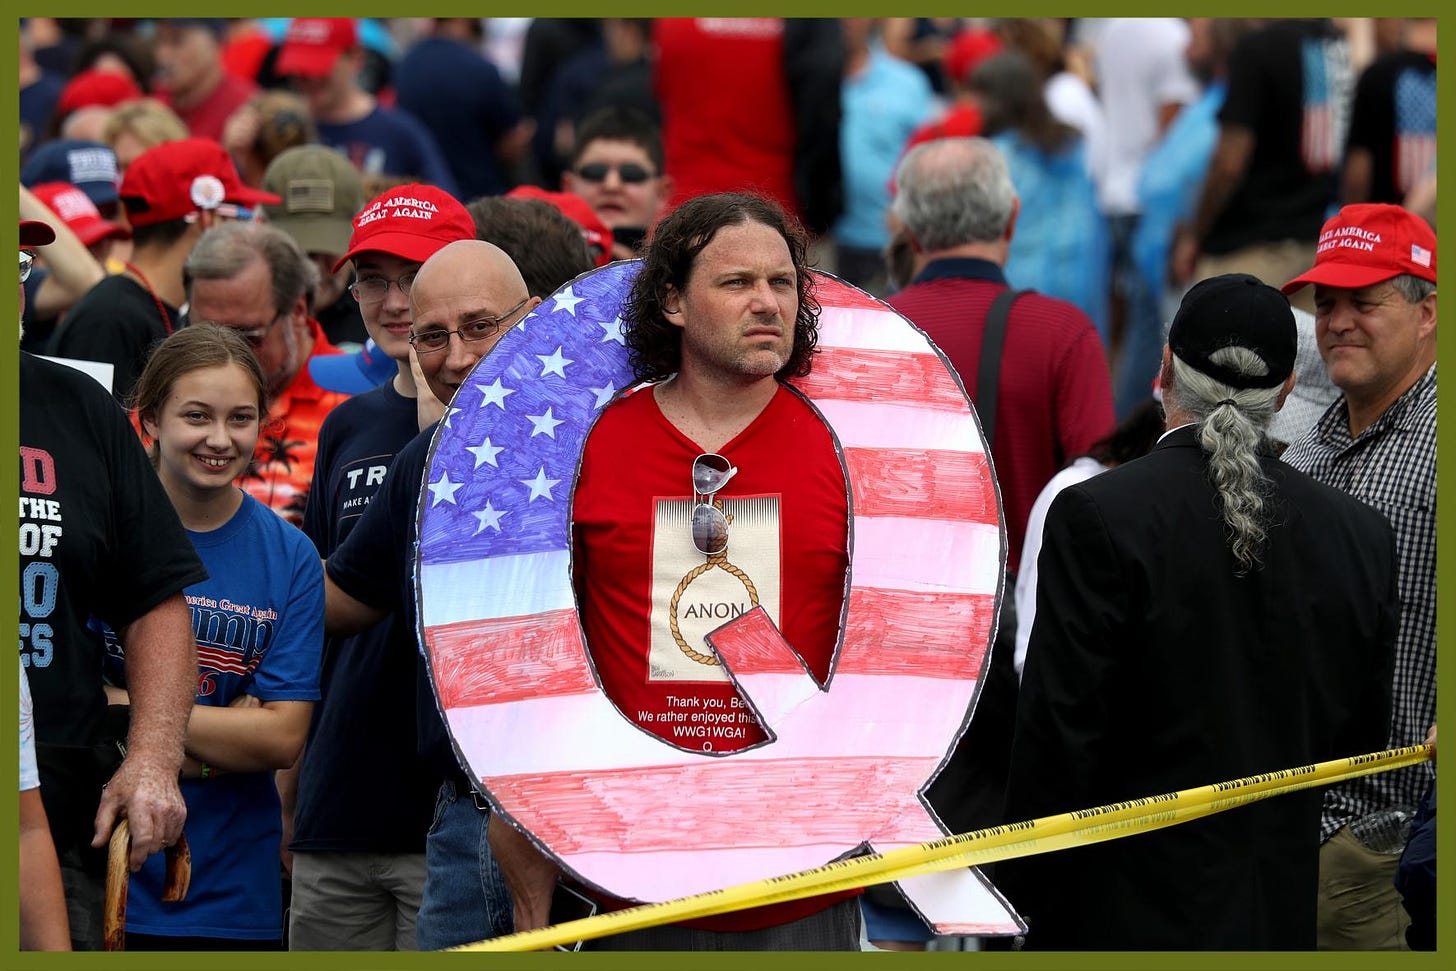 David Reinert holds a large "Q" sign while waiting in line on to see President Trump at his rally in Wilkes Barre, Pennsylvania, in 2018. The number of Americans who believe the main tenets of the conspiracy theory has risen by 4 per cent over the past year